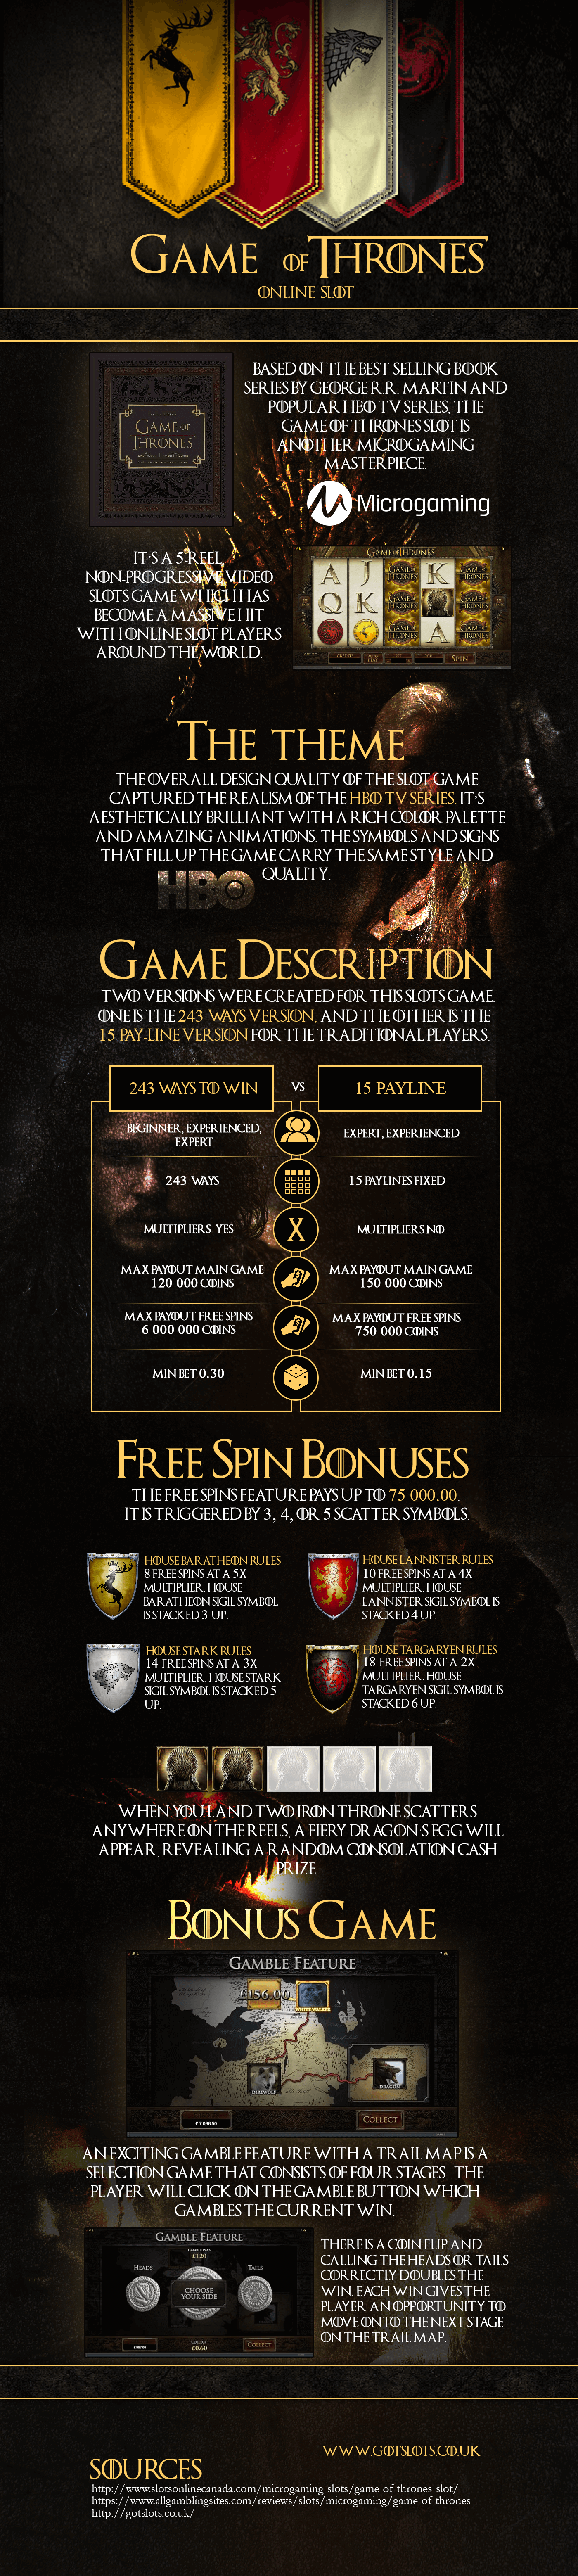 Game of Thrones Slot Guide